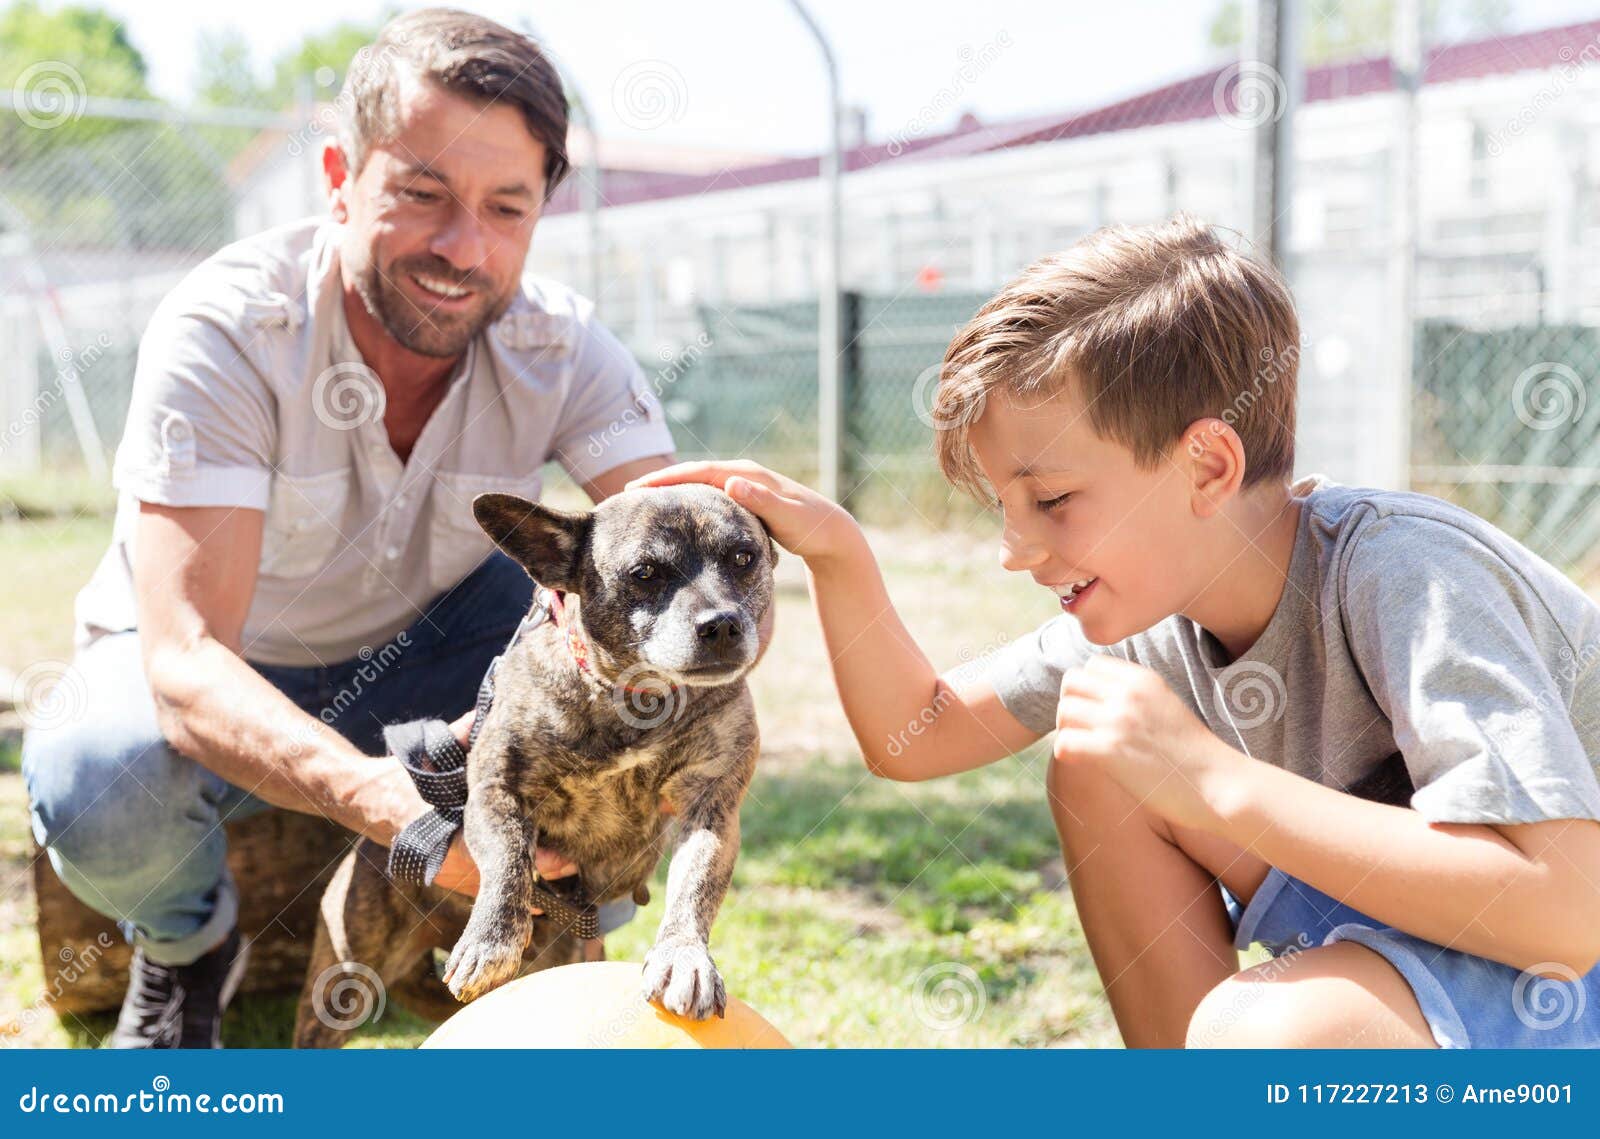 dad and his son taking care of abandoned dog in animal shelter